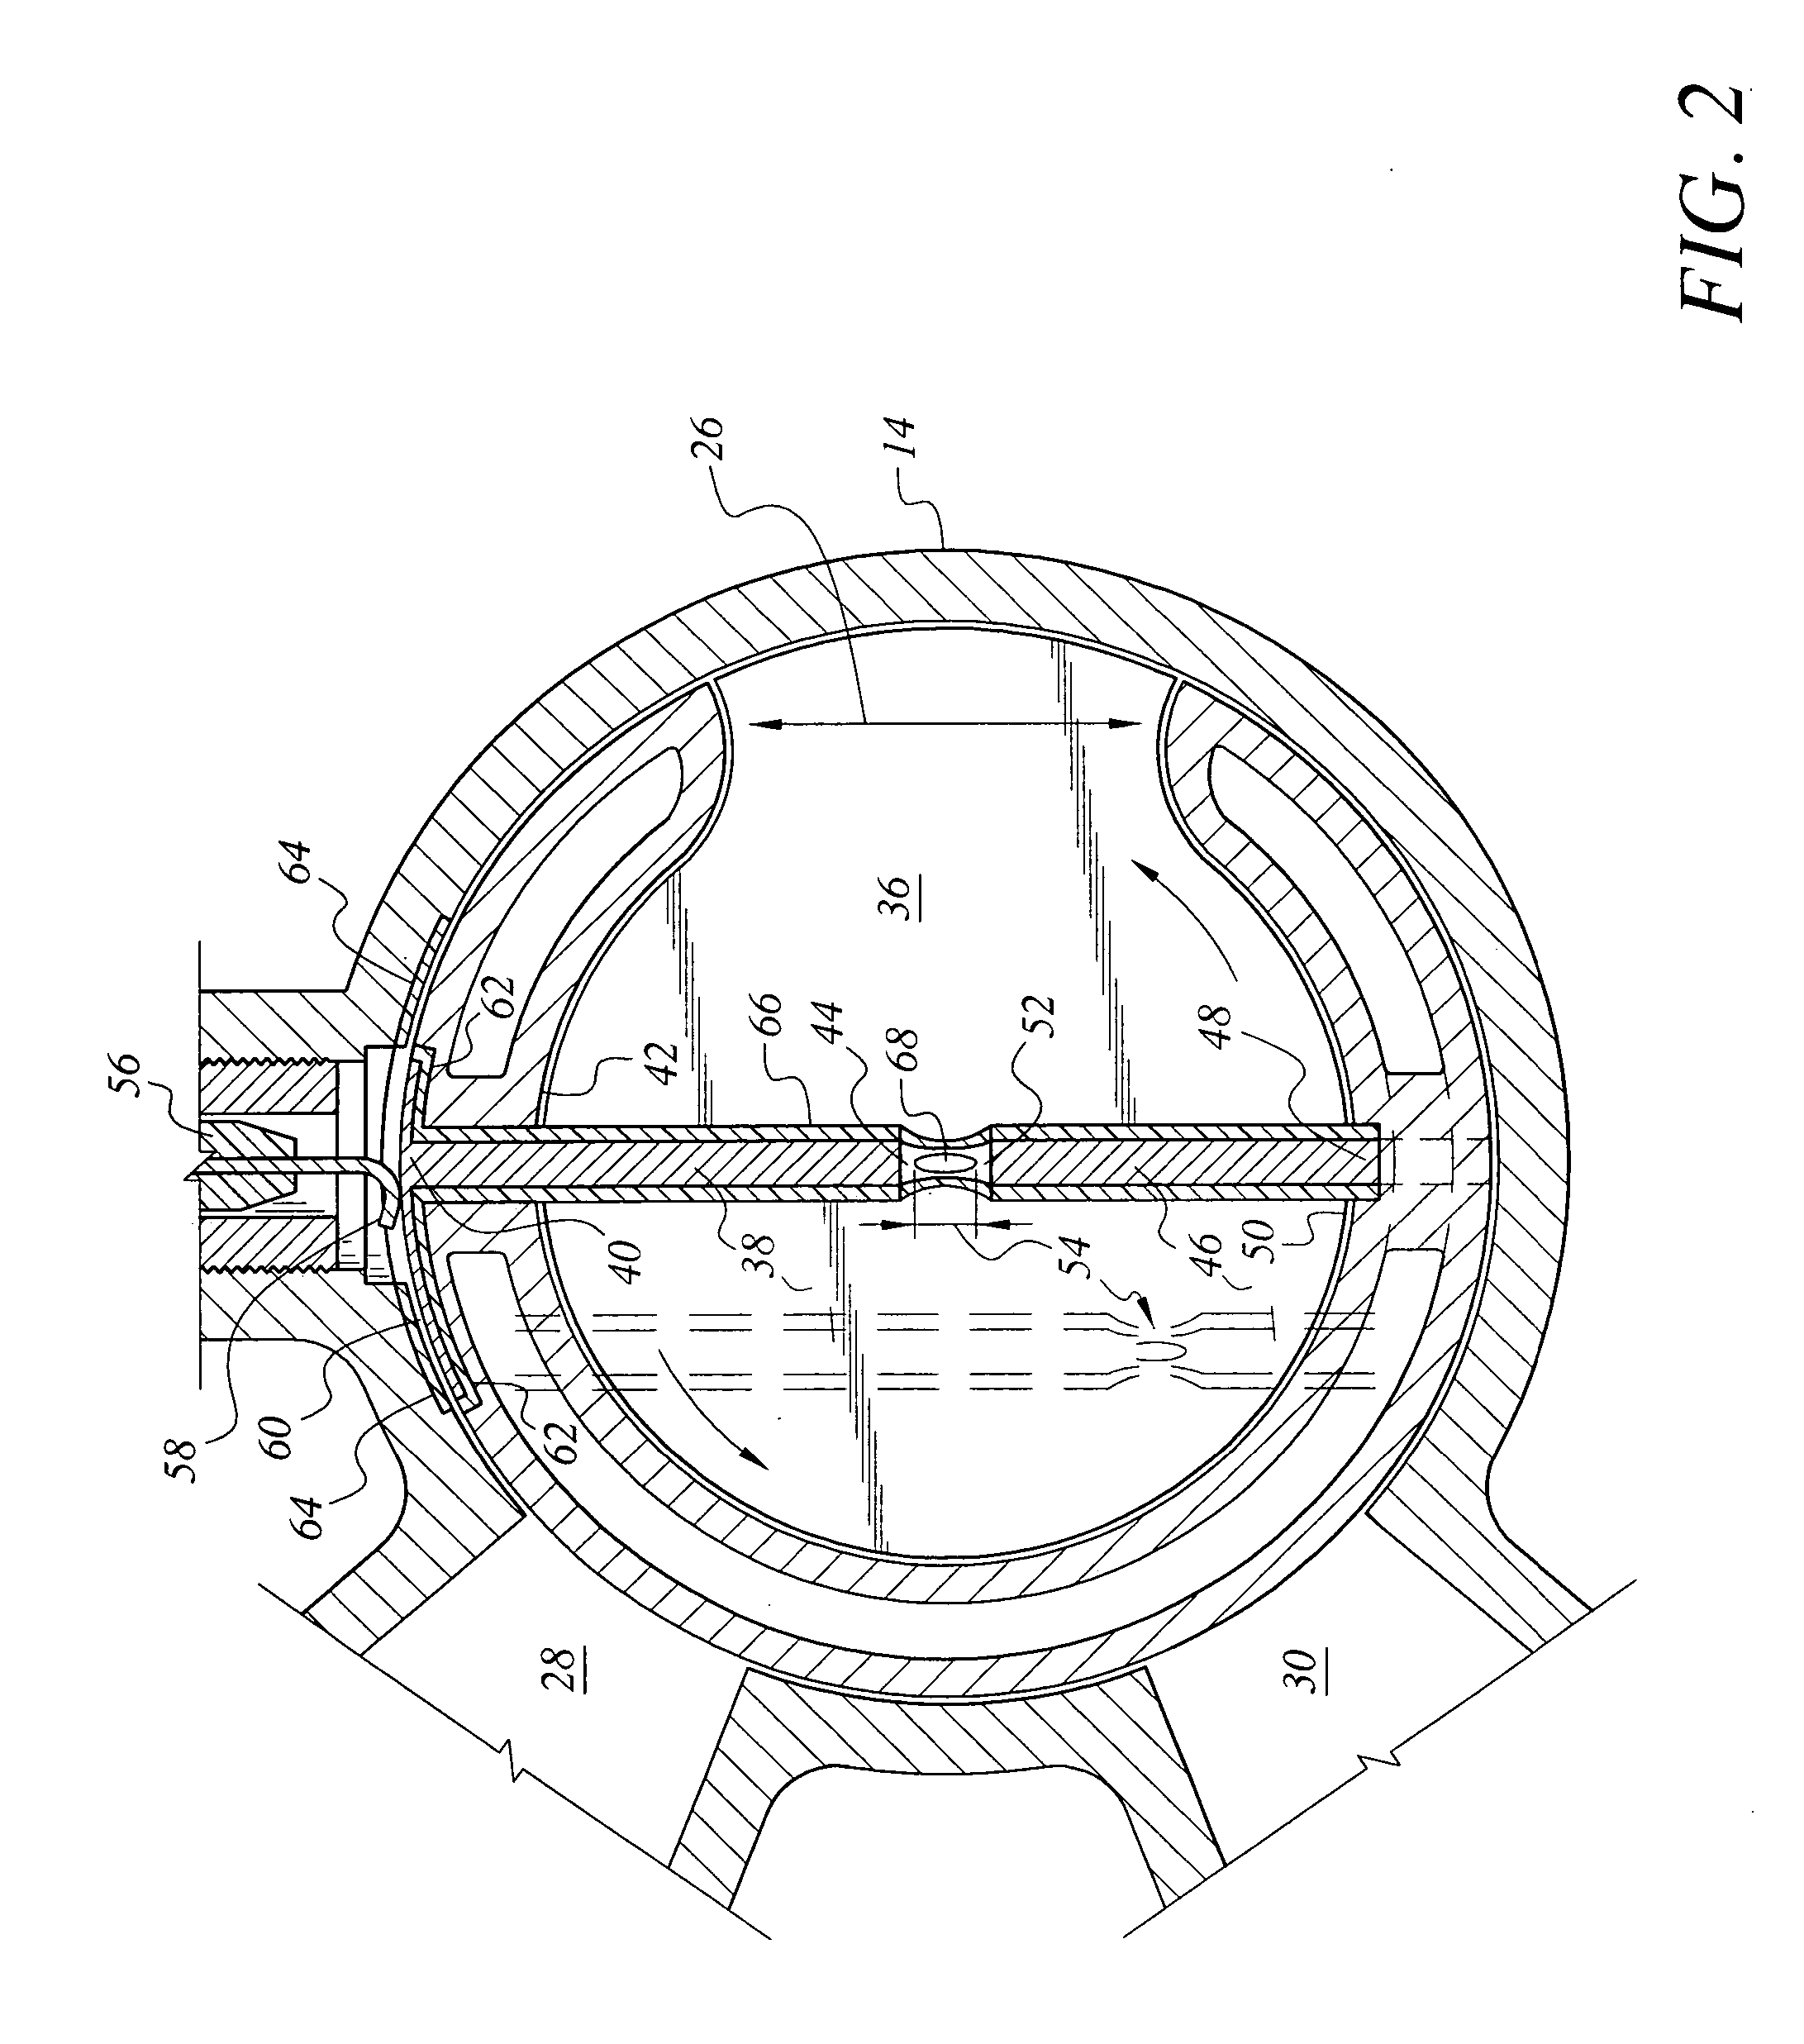 Centrally located ignition source in a combustion chamber